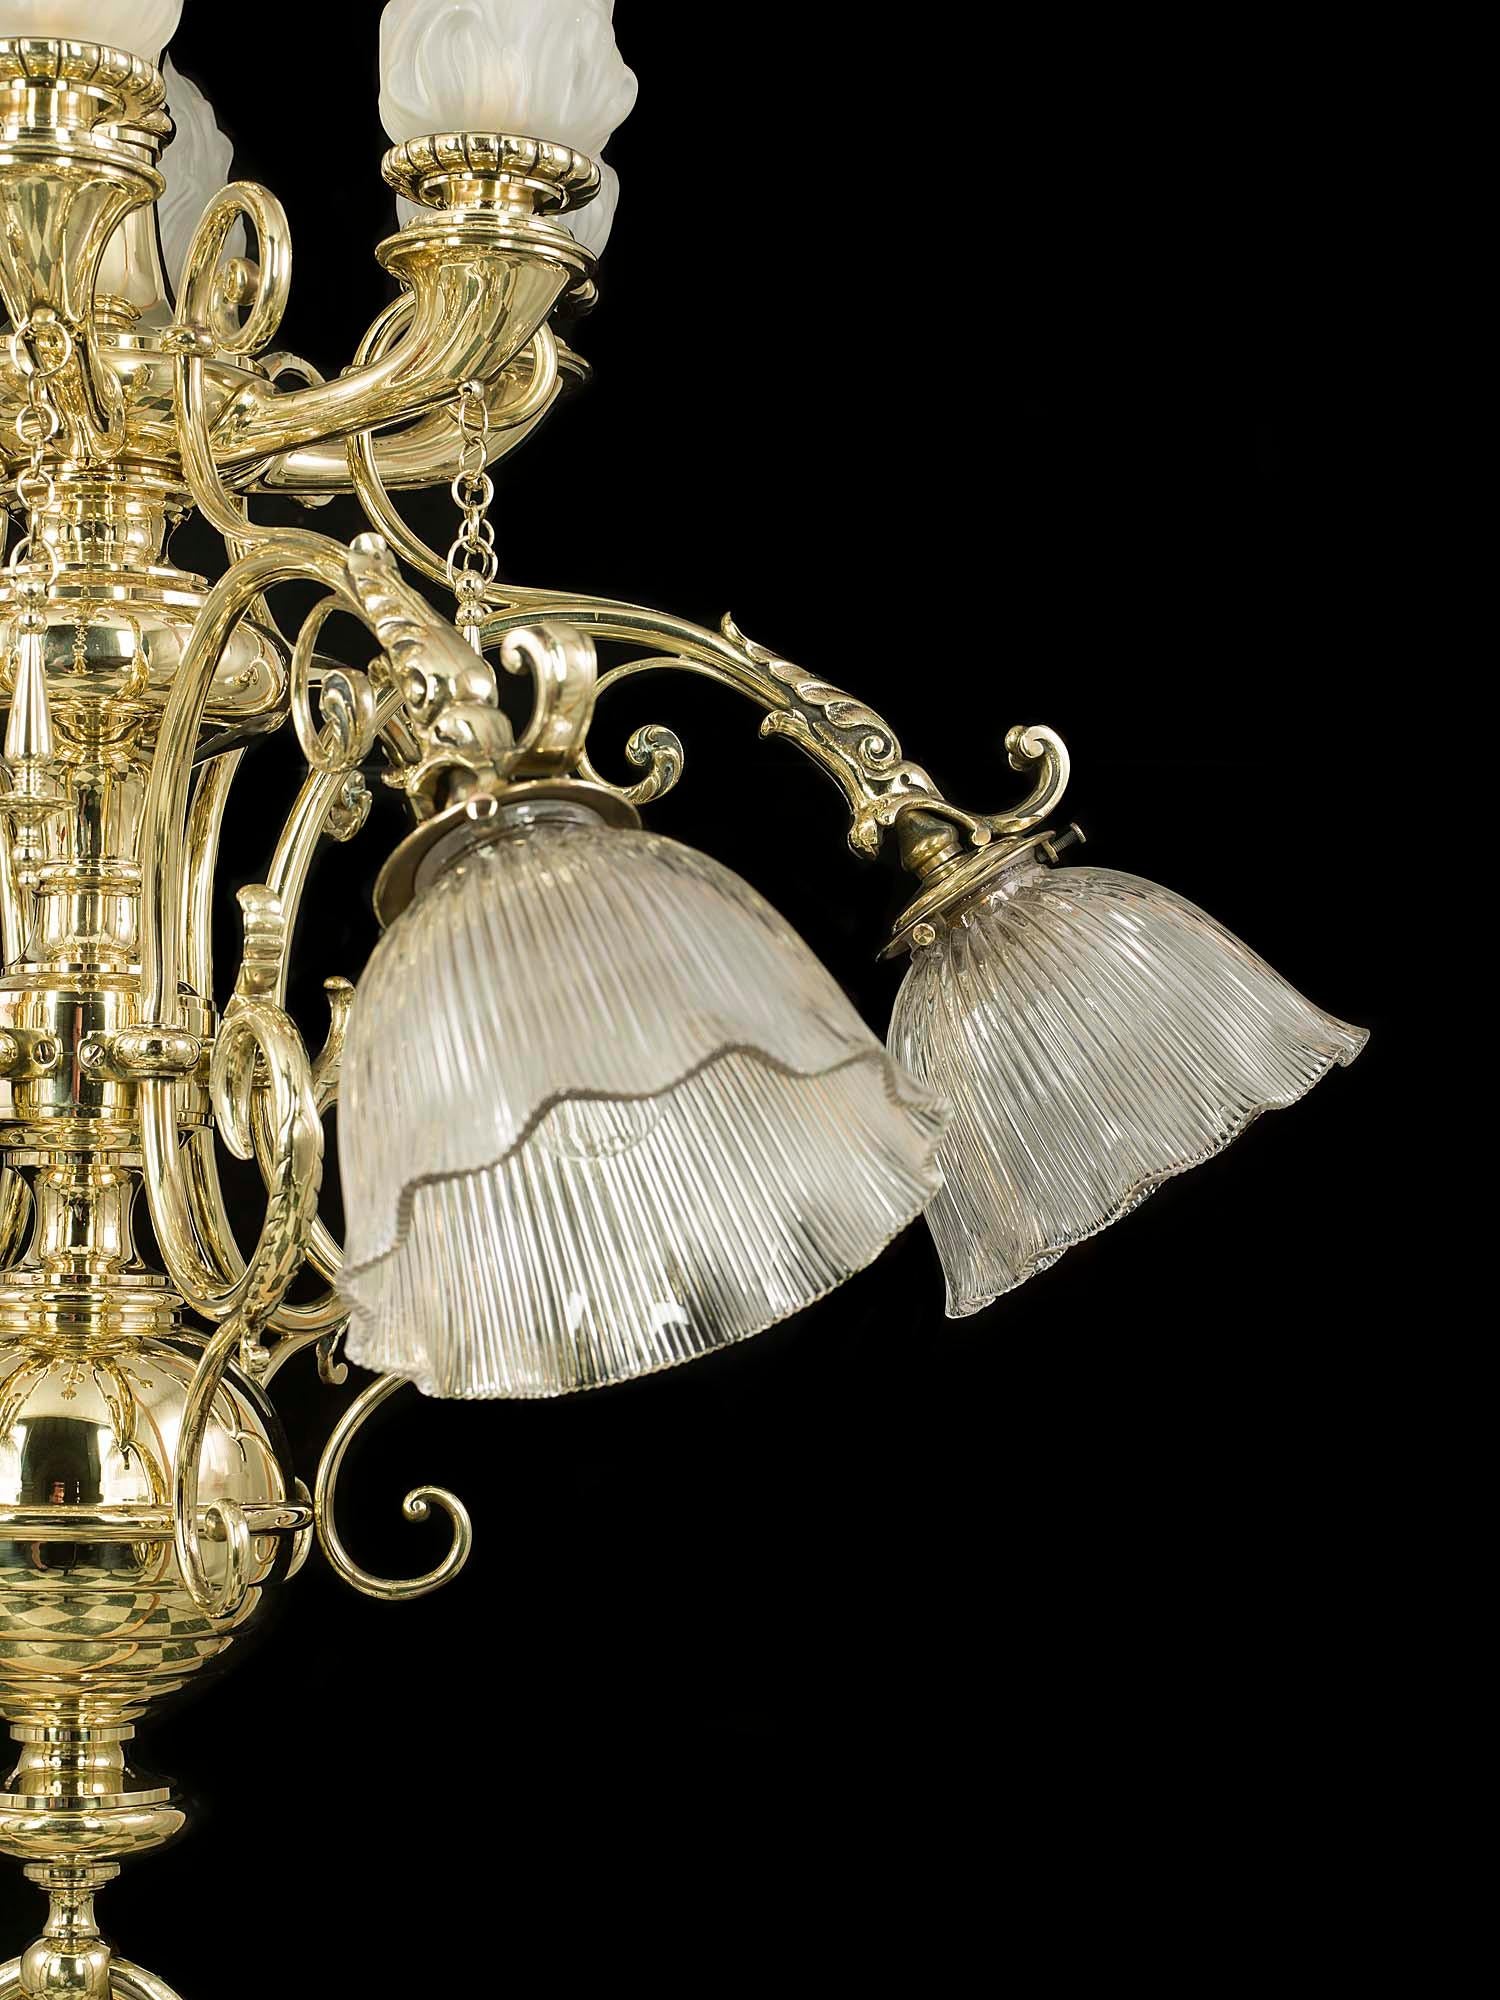 antique chandeliers for sale